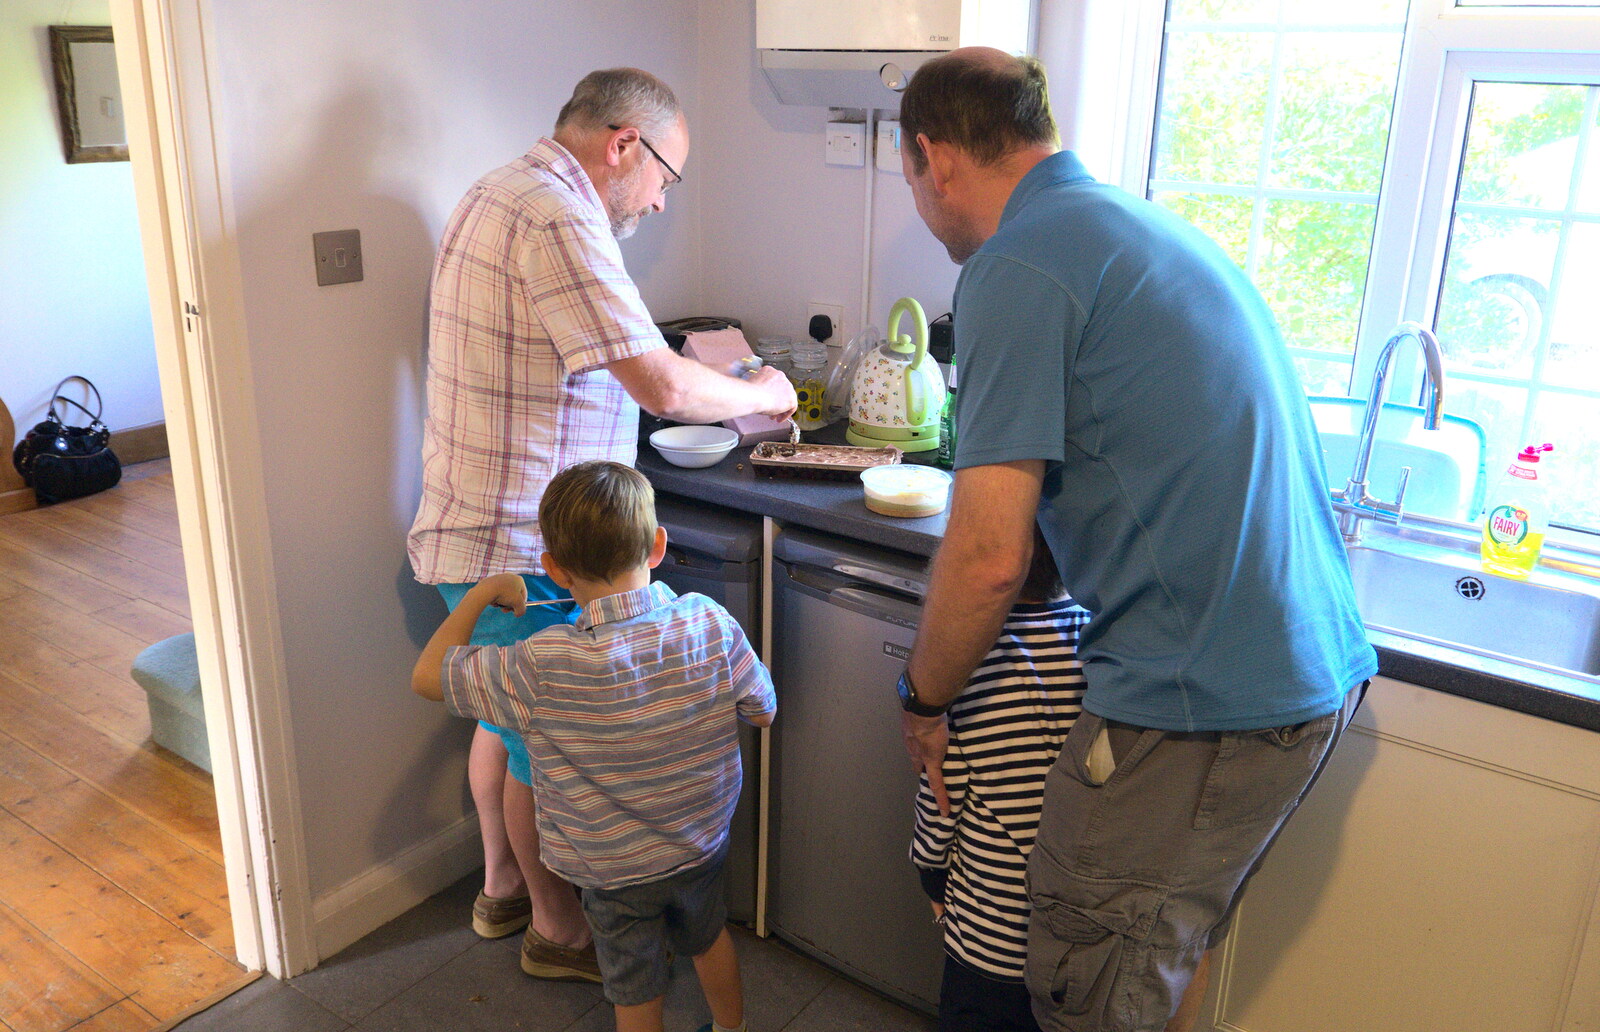 Hamish and Phil in the kitchen from A Barbeque at Sean's, Walkford, Dorset - 28th July 2018